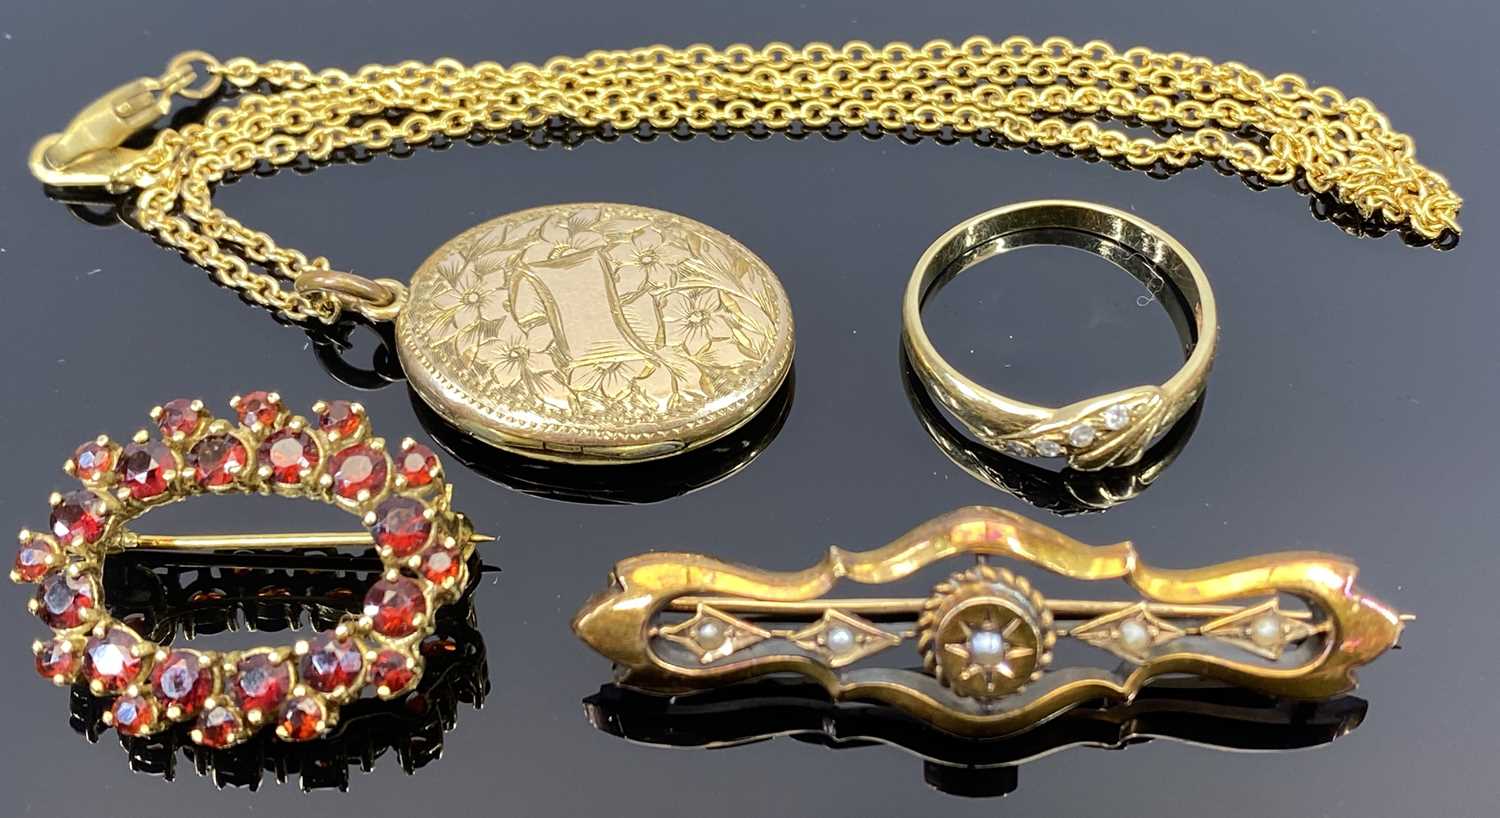 9CT GOLD & YELLOW METAL JEWELLERY - 4 items to include a 9ct gold oval brooch set with garnet colour